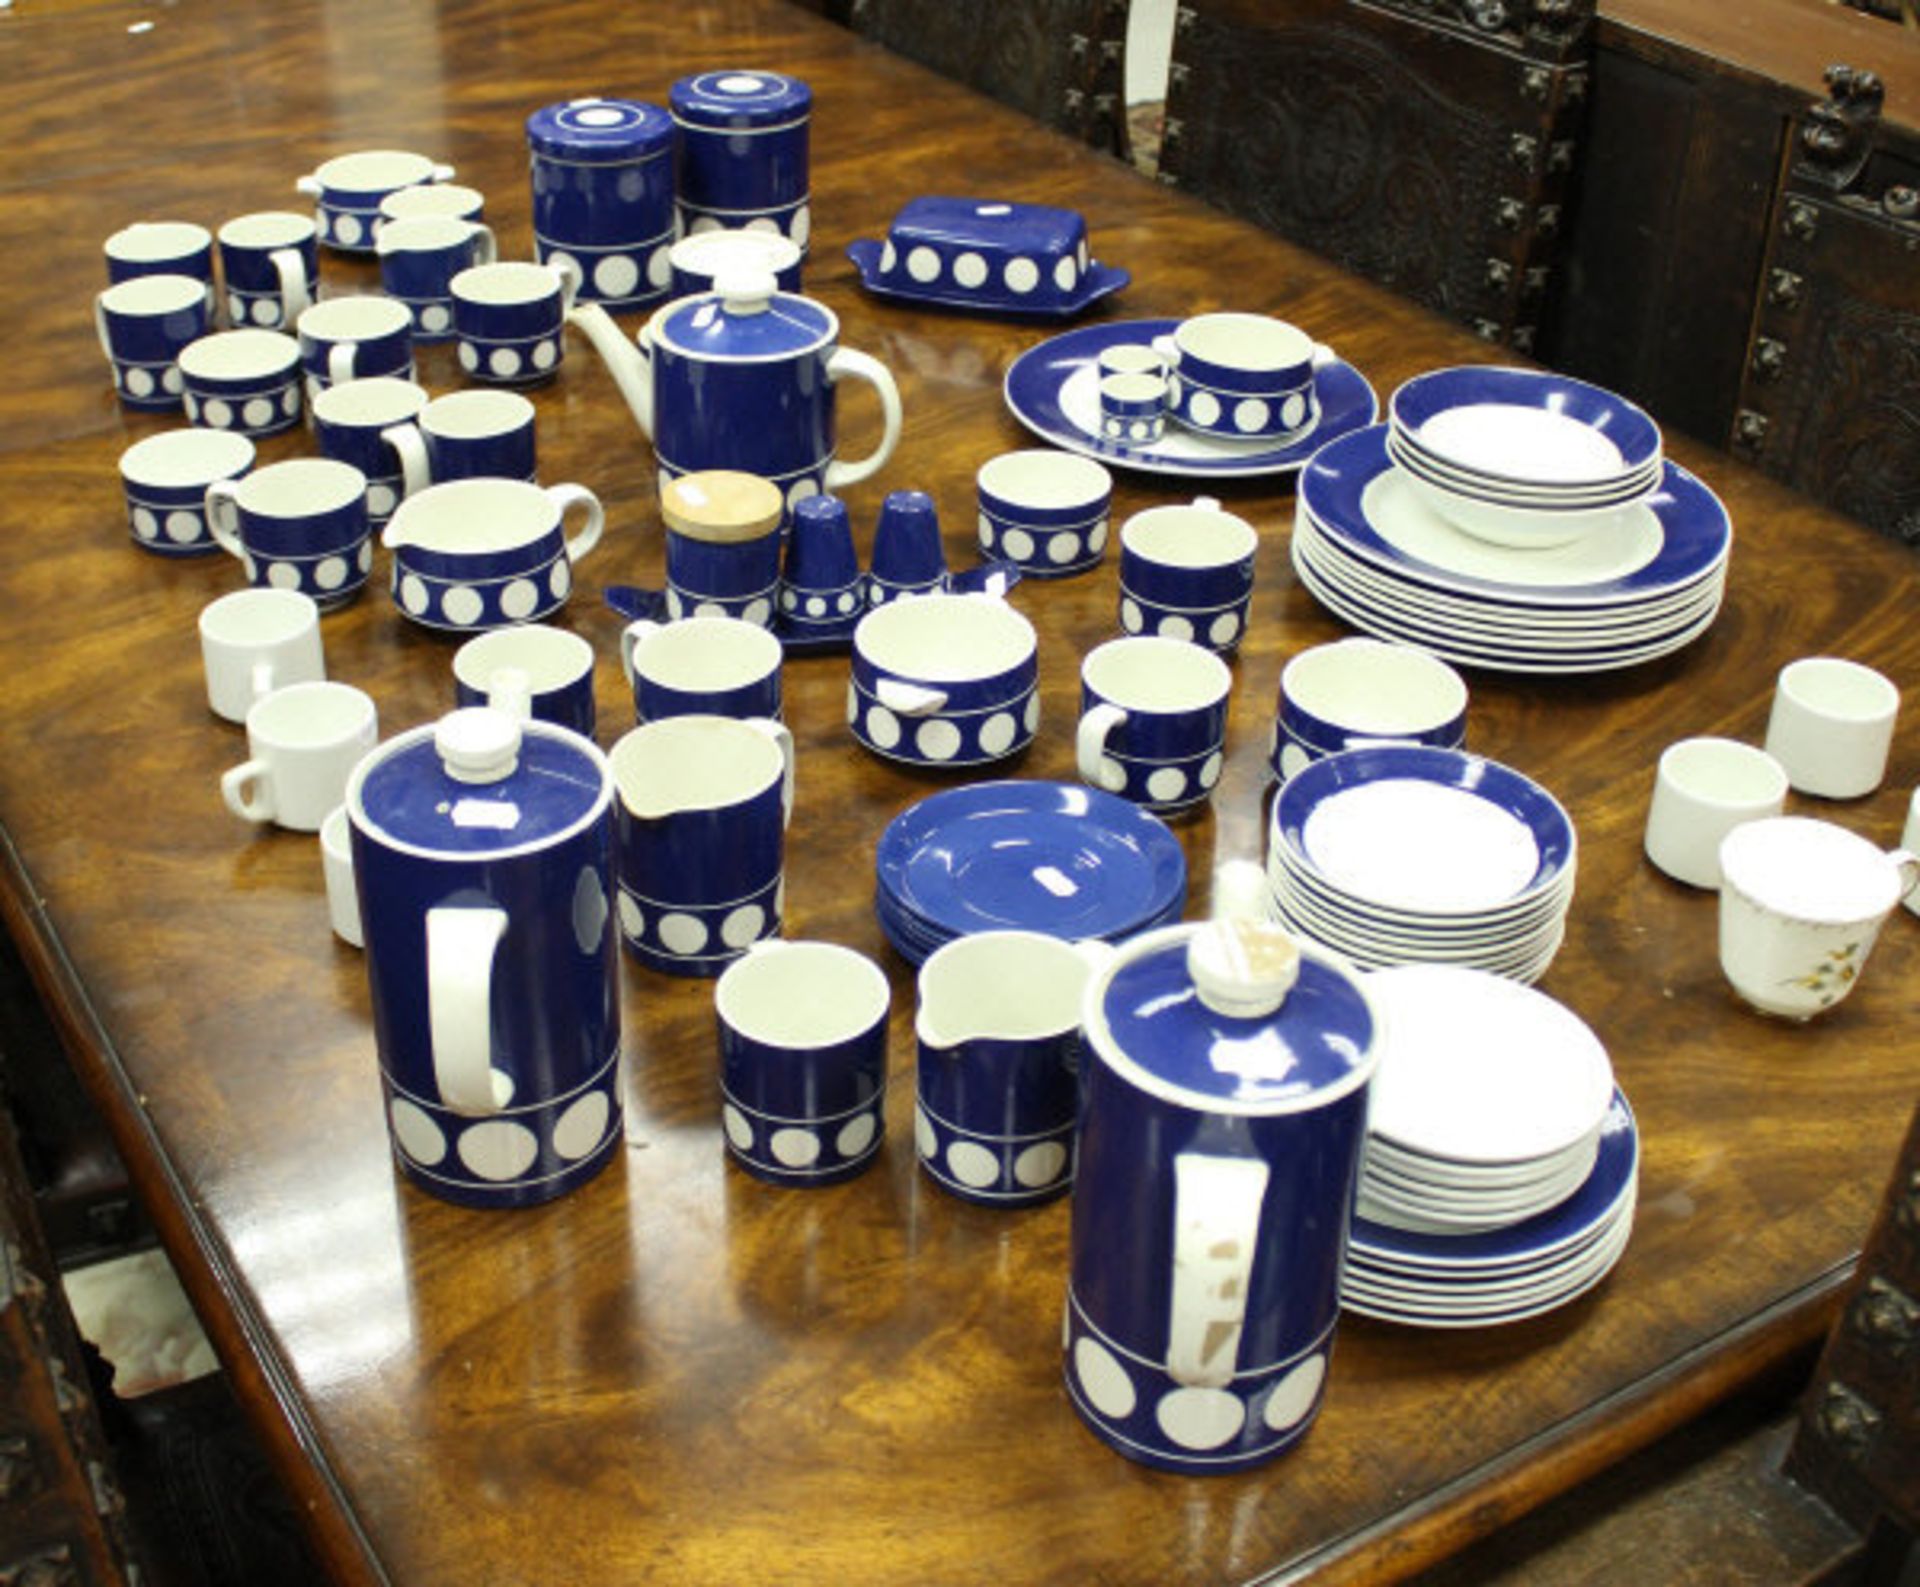 A T G Green Limited "Channel Isles Collection" of dinner and tea wares including cups, saucers,